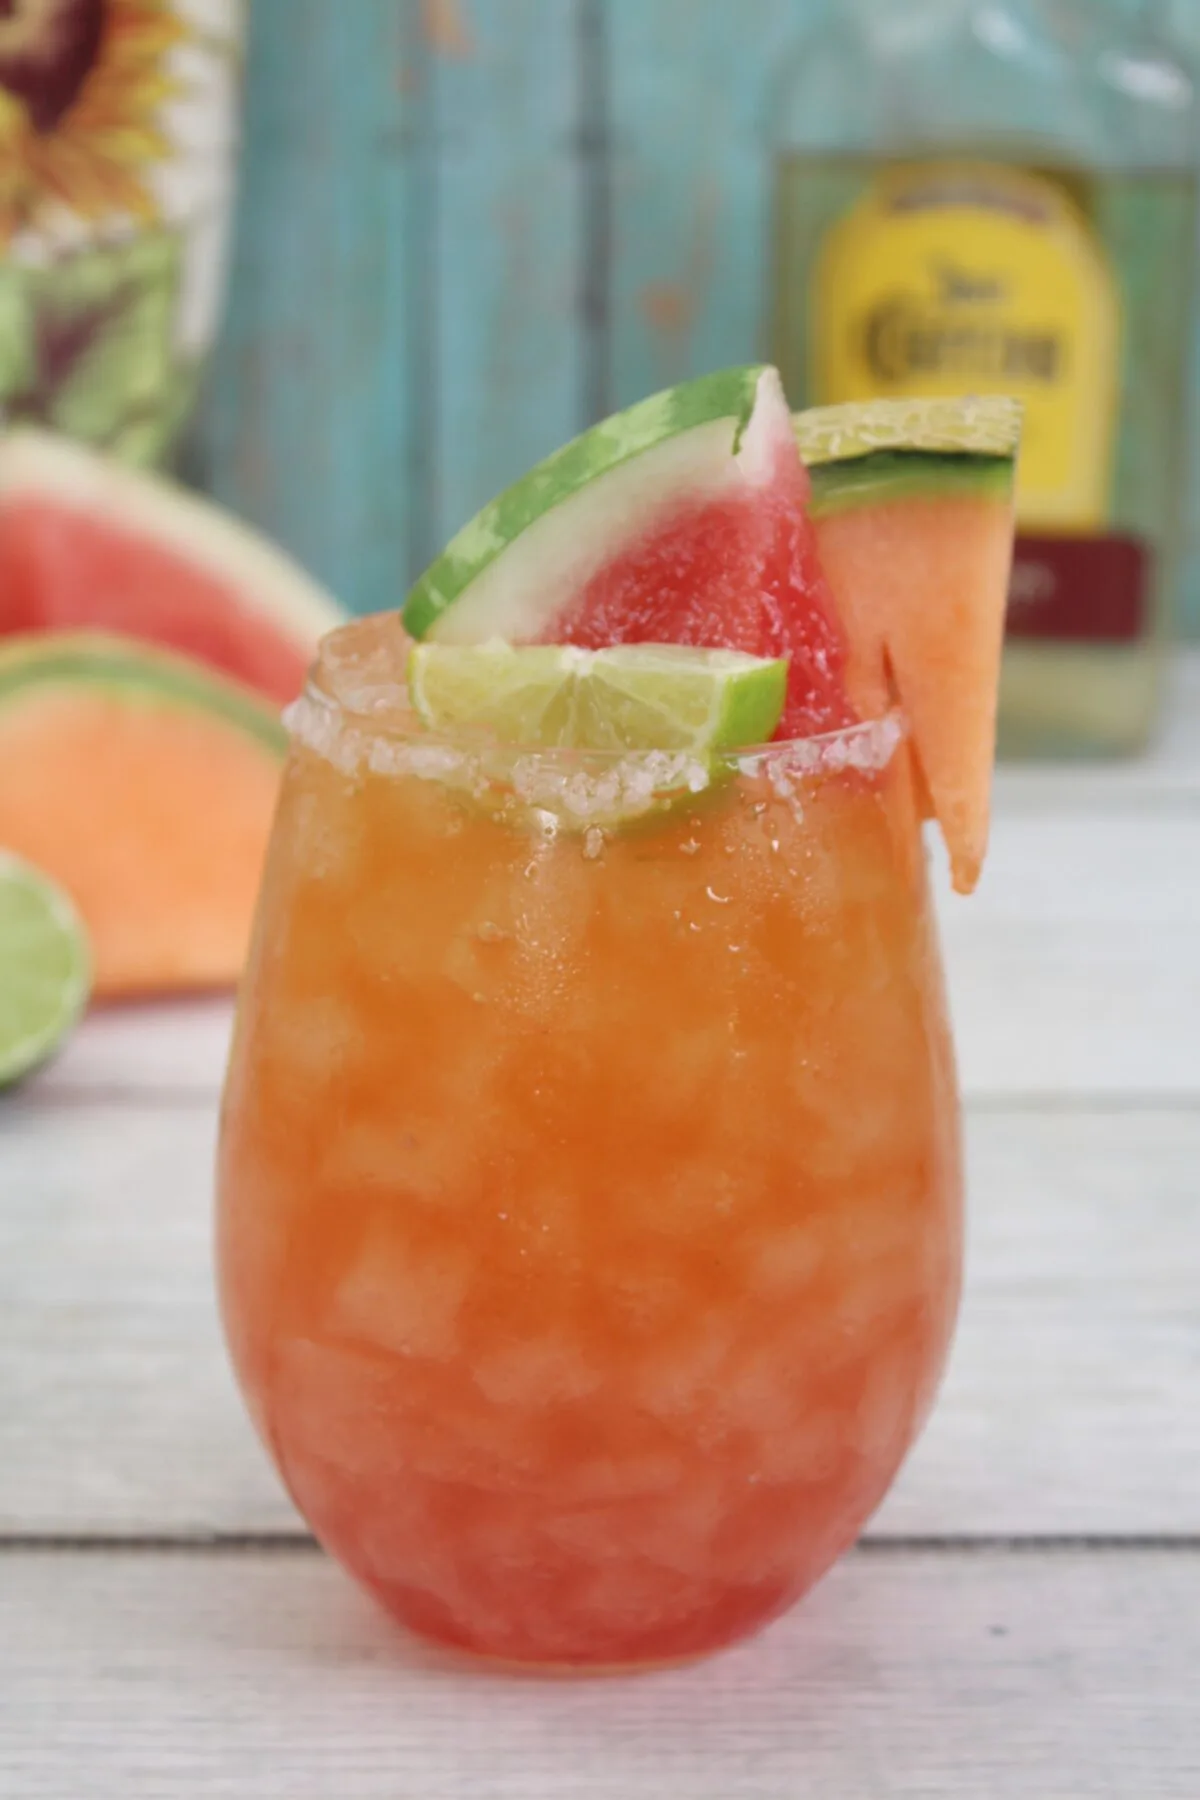 Satisfy your craving for a summer sipper with this delicious and easy Melon Margarita Recipe - it's a summertime delight!